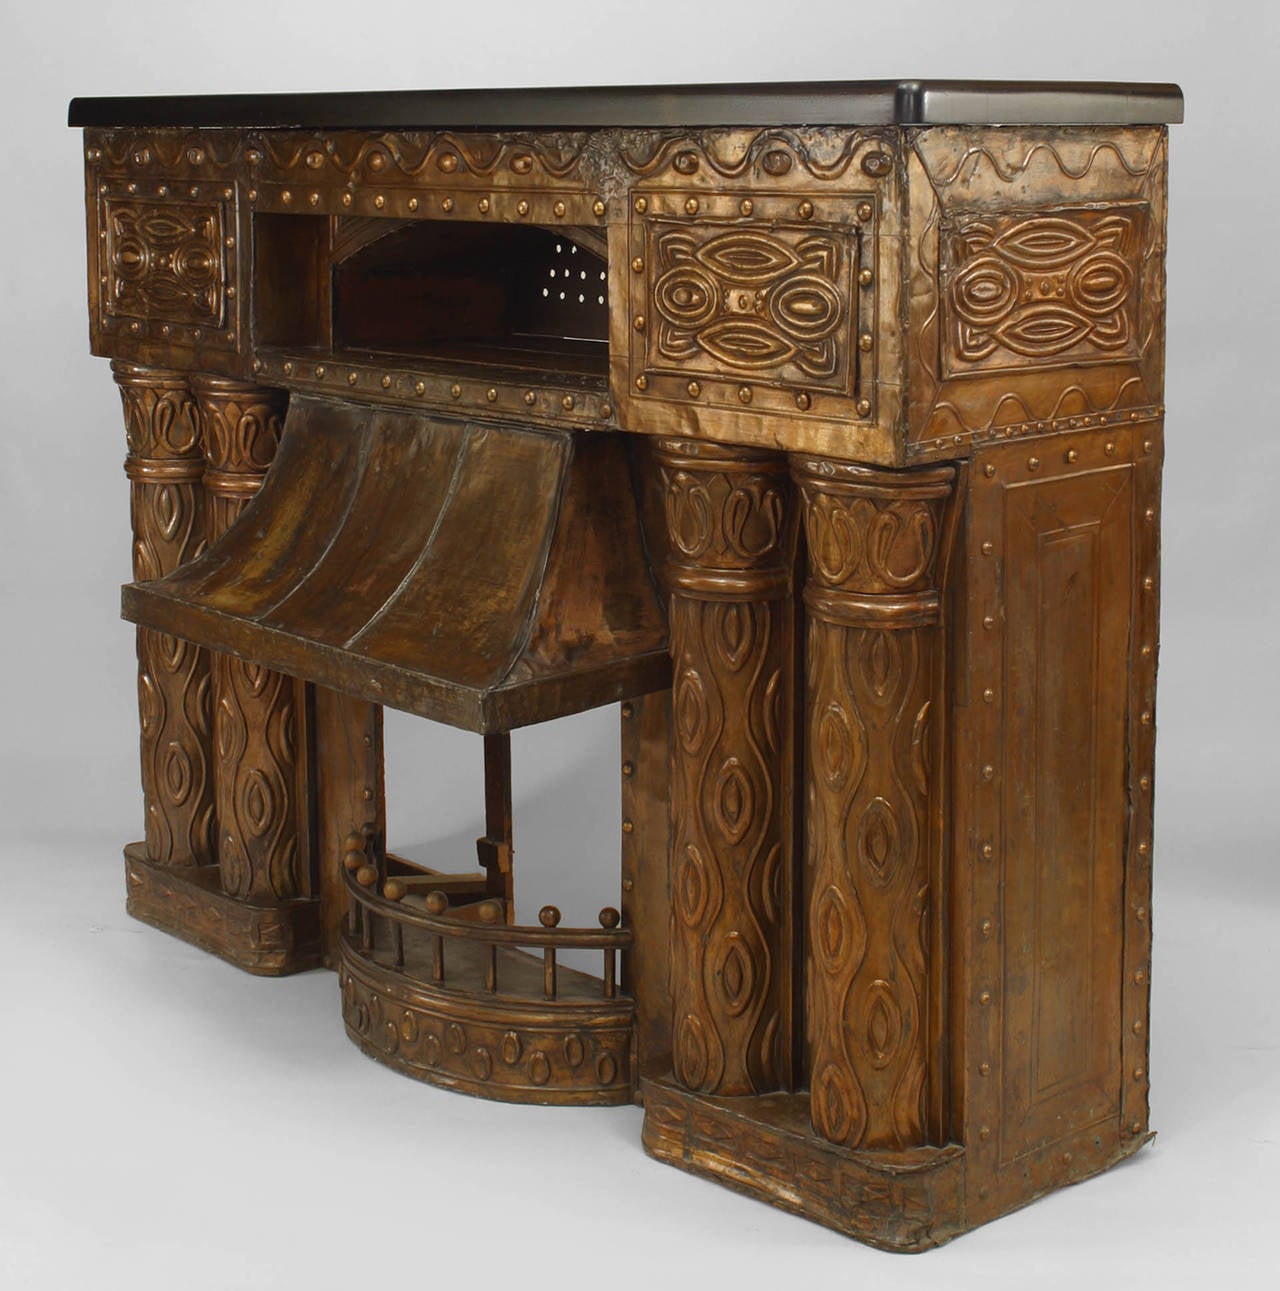 Austrian Secessionist embossed brass fireplace with double column design sides and hooded center below an open shelf with a (modern) ebonized top.
 